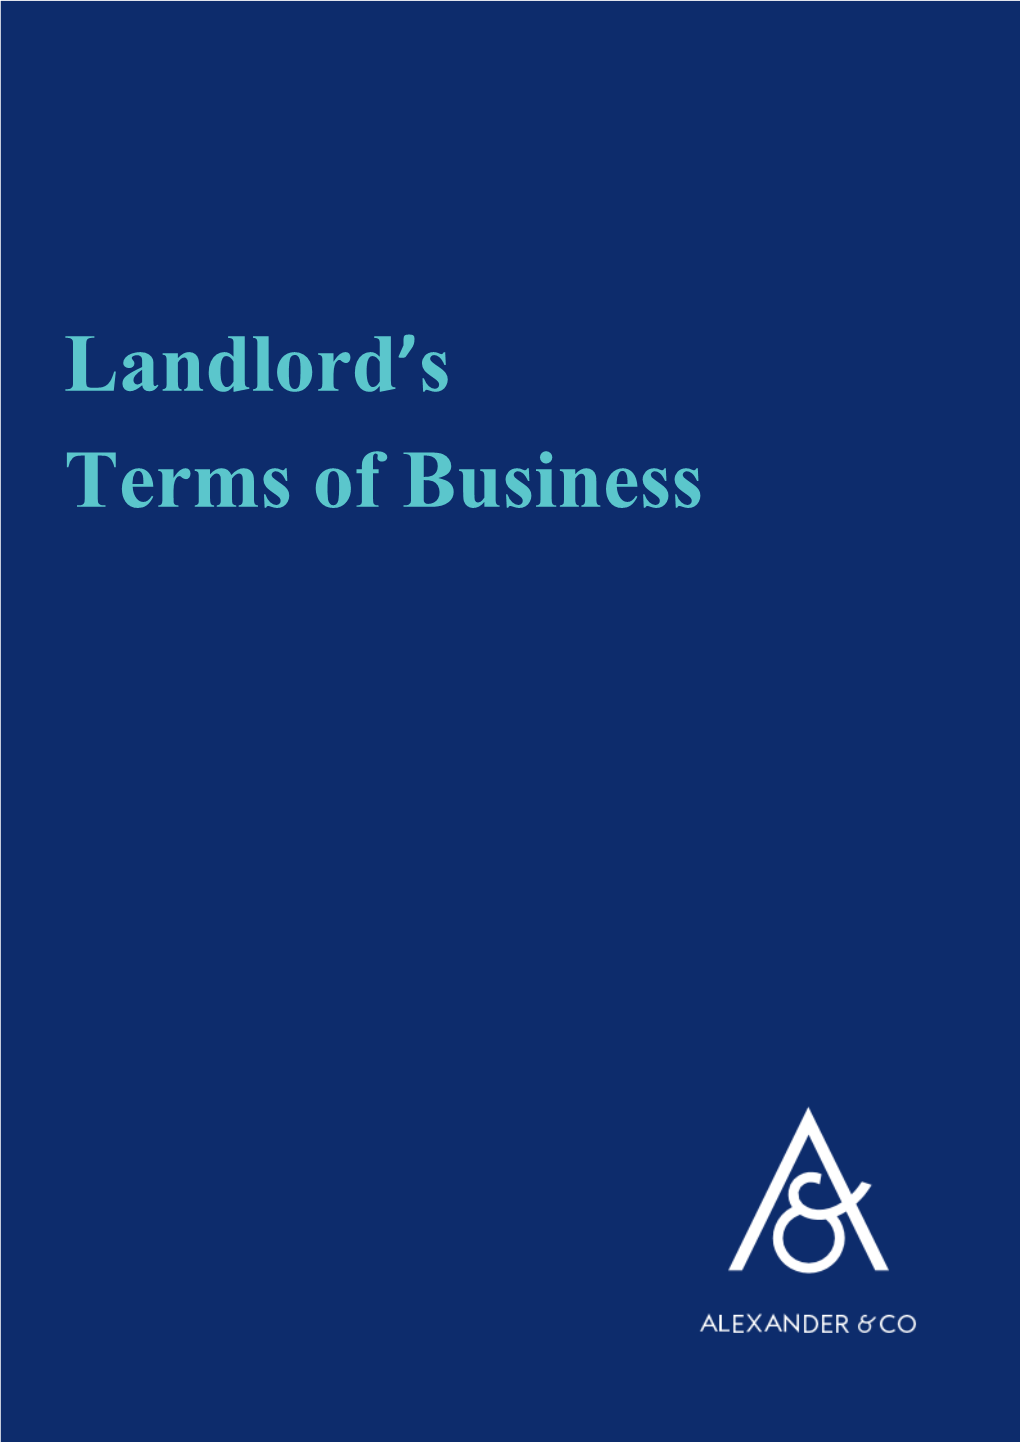 Landlord's Terms of Business